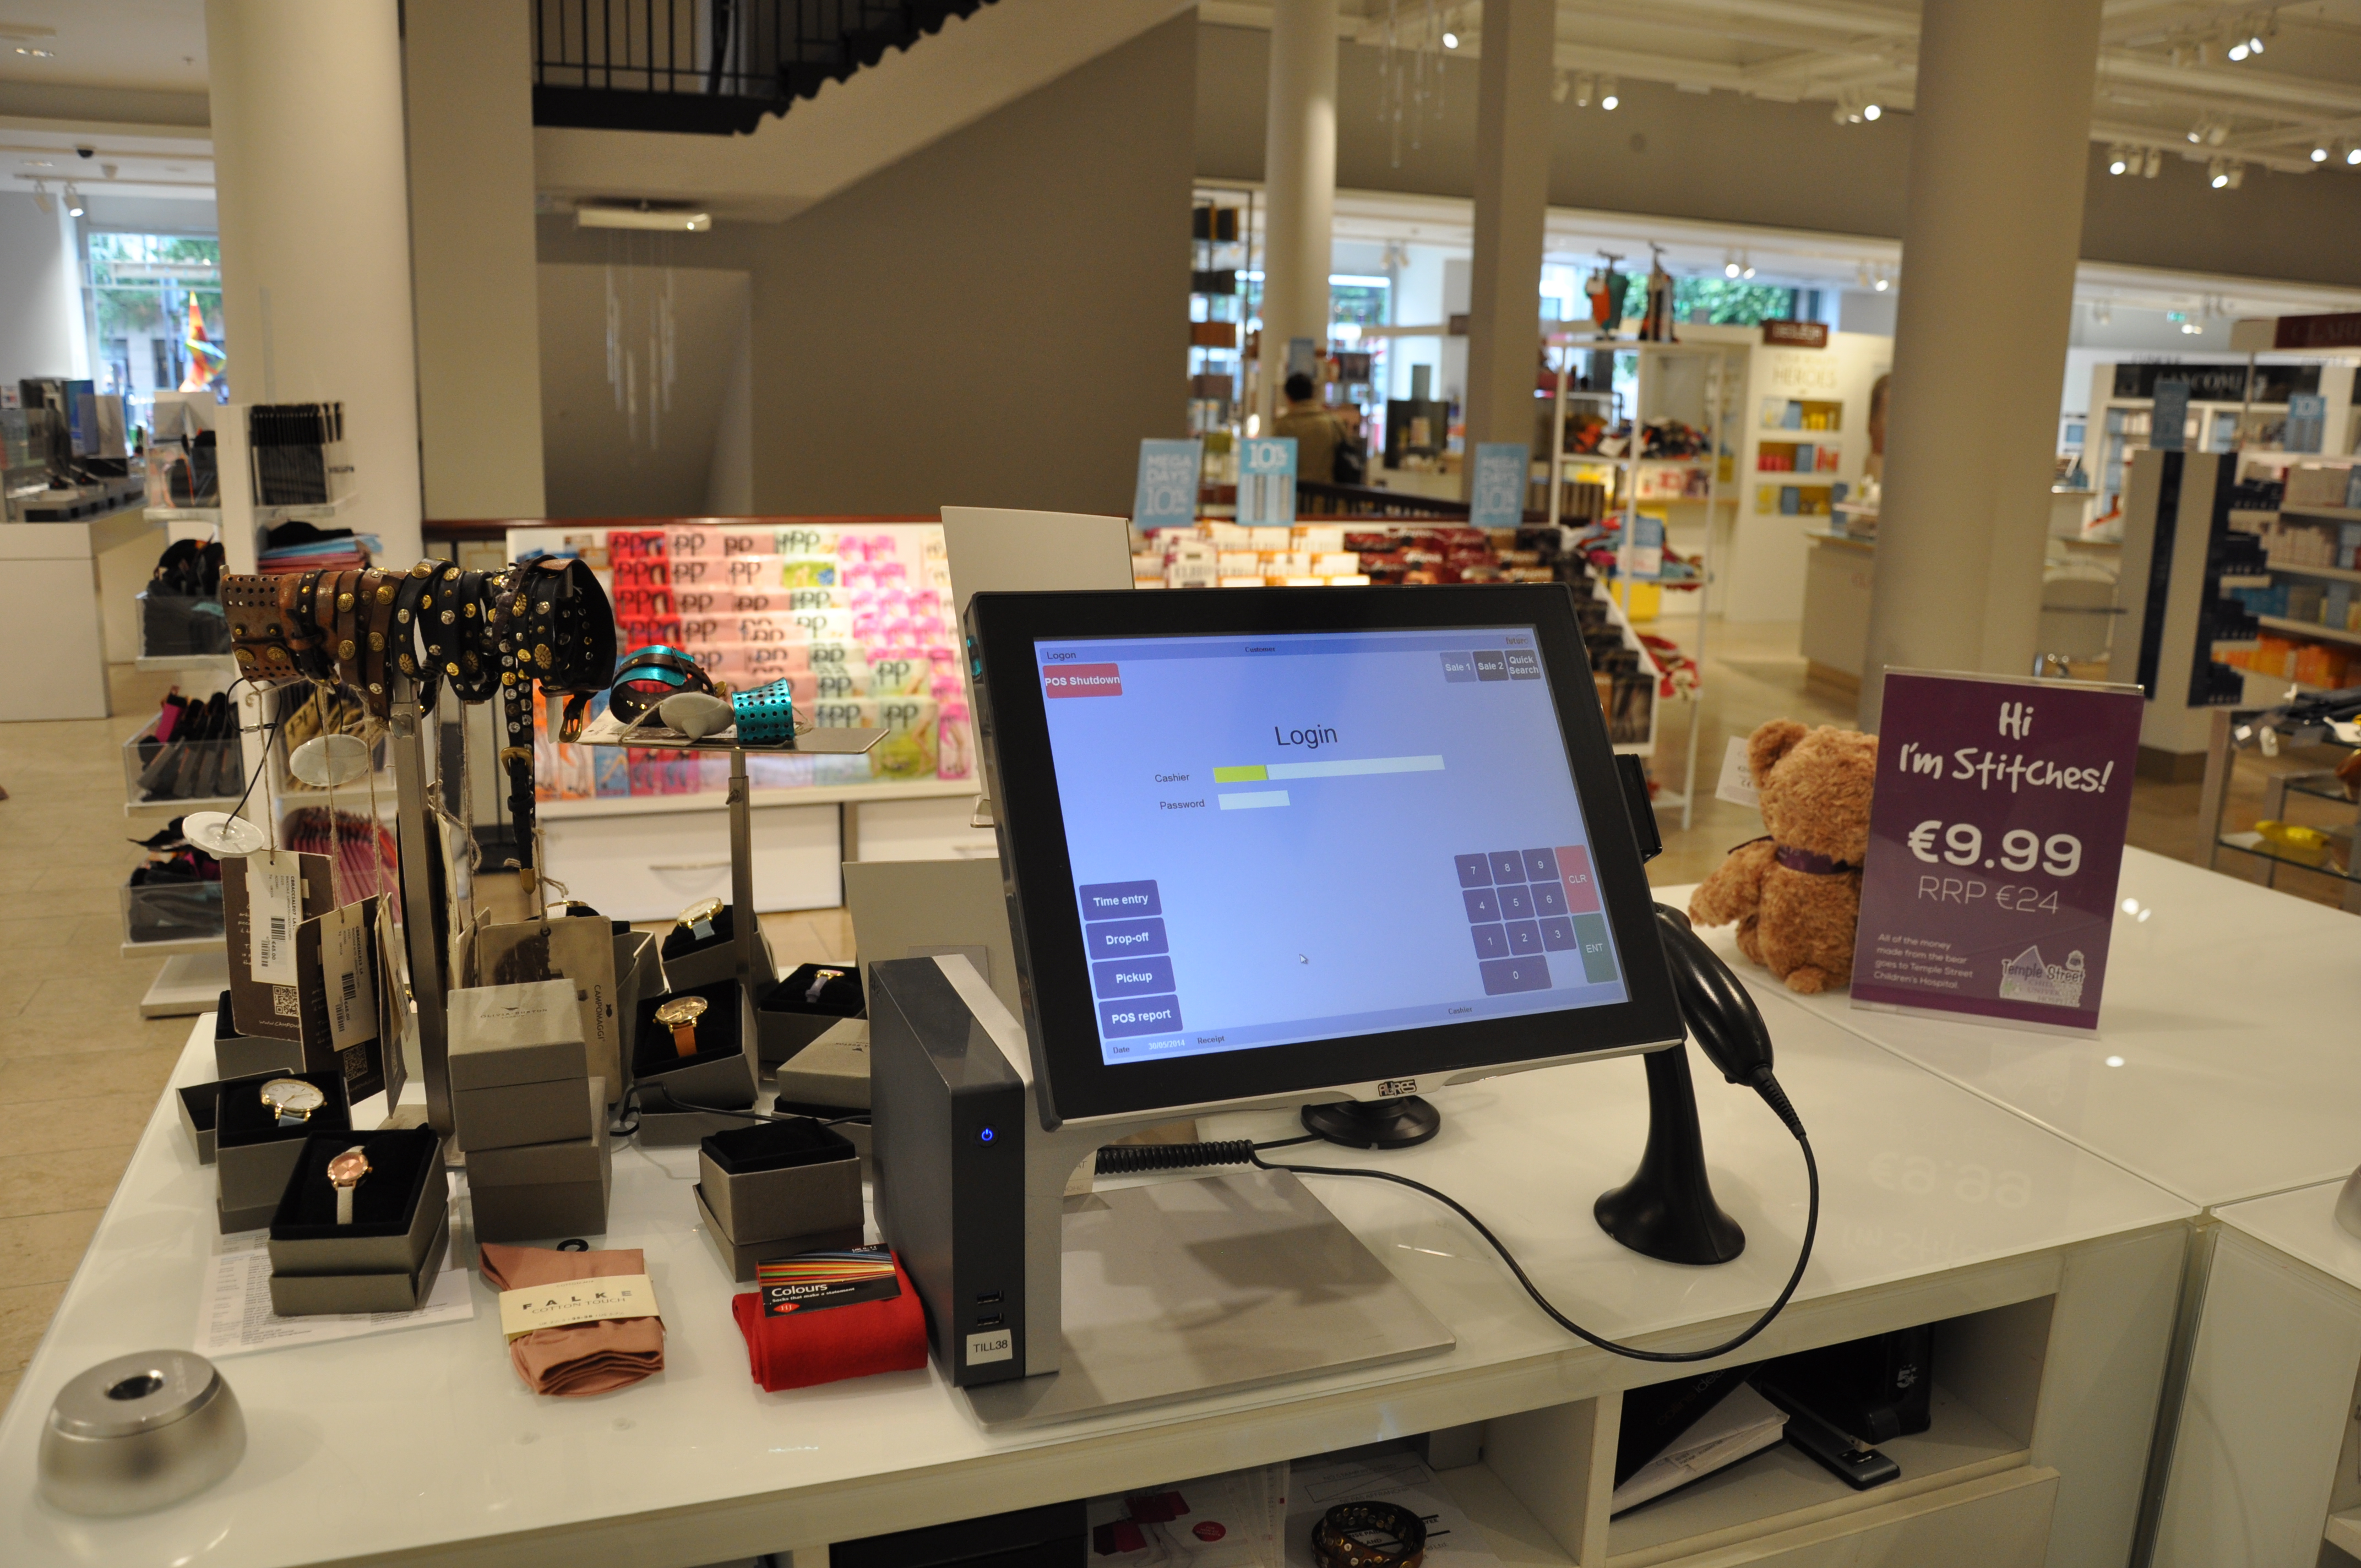 AURES’ sangos using Futura's EPoS solution in use in Clerys